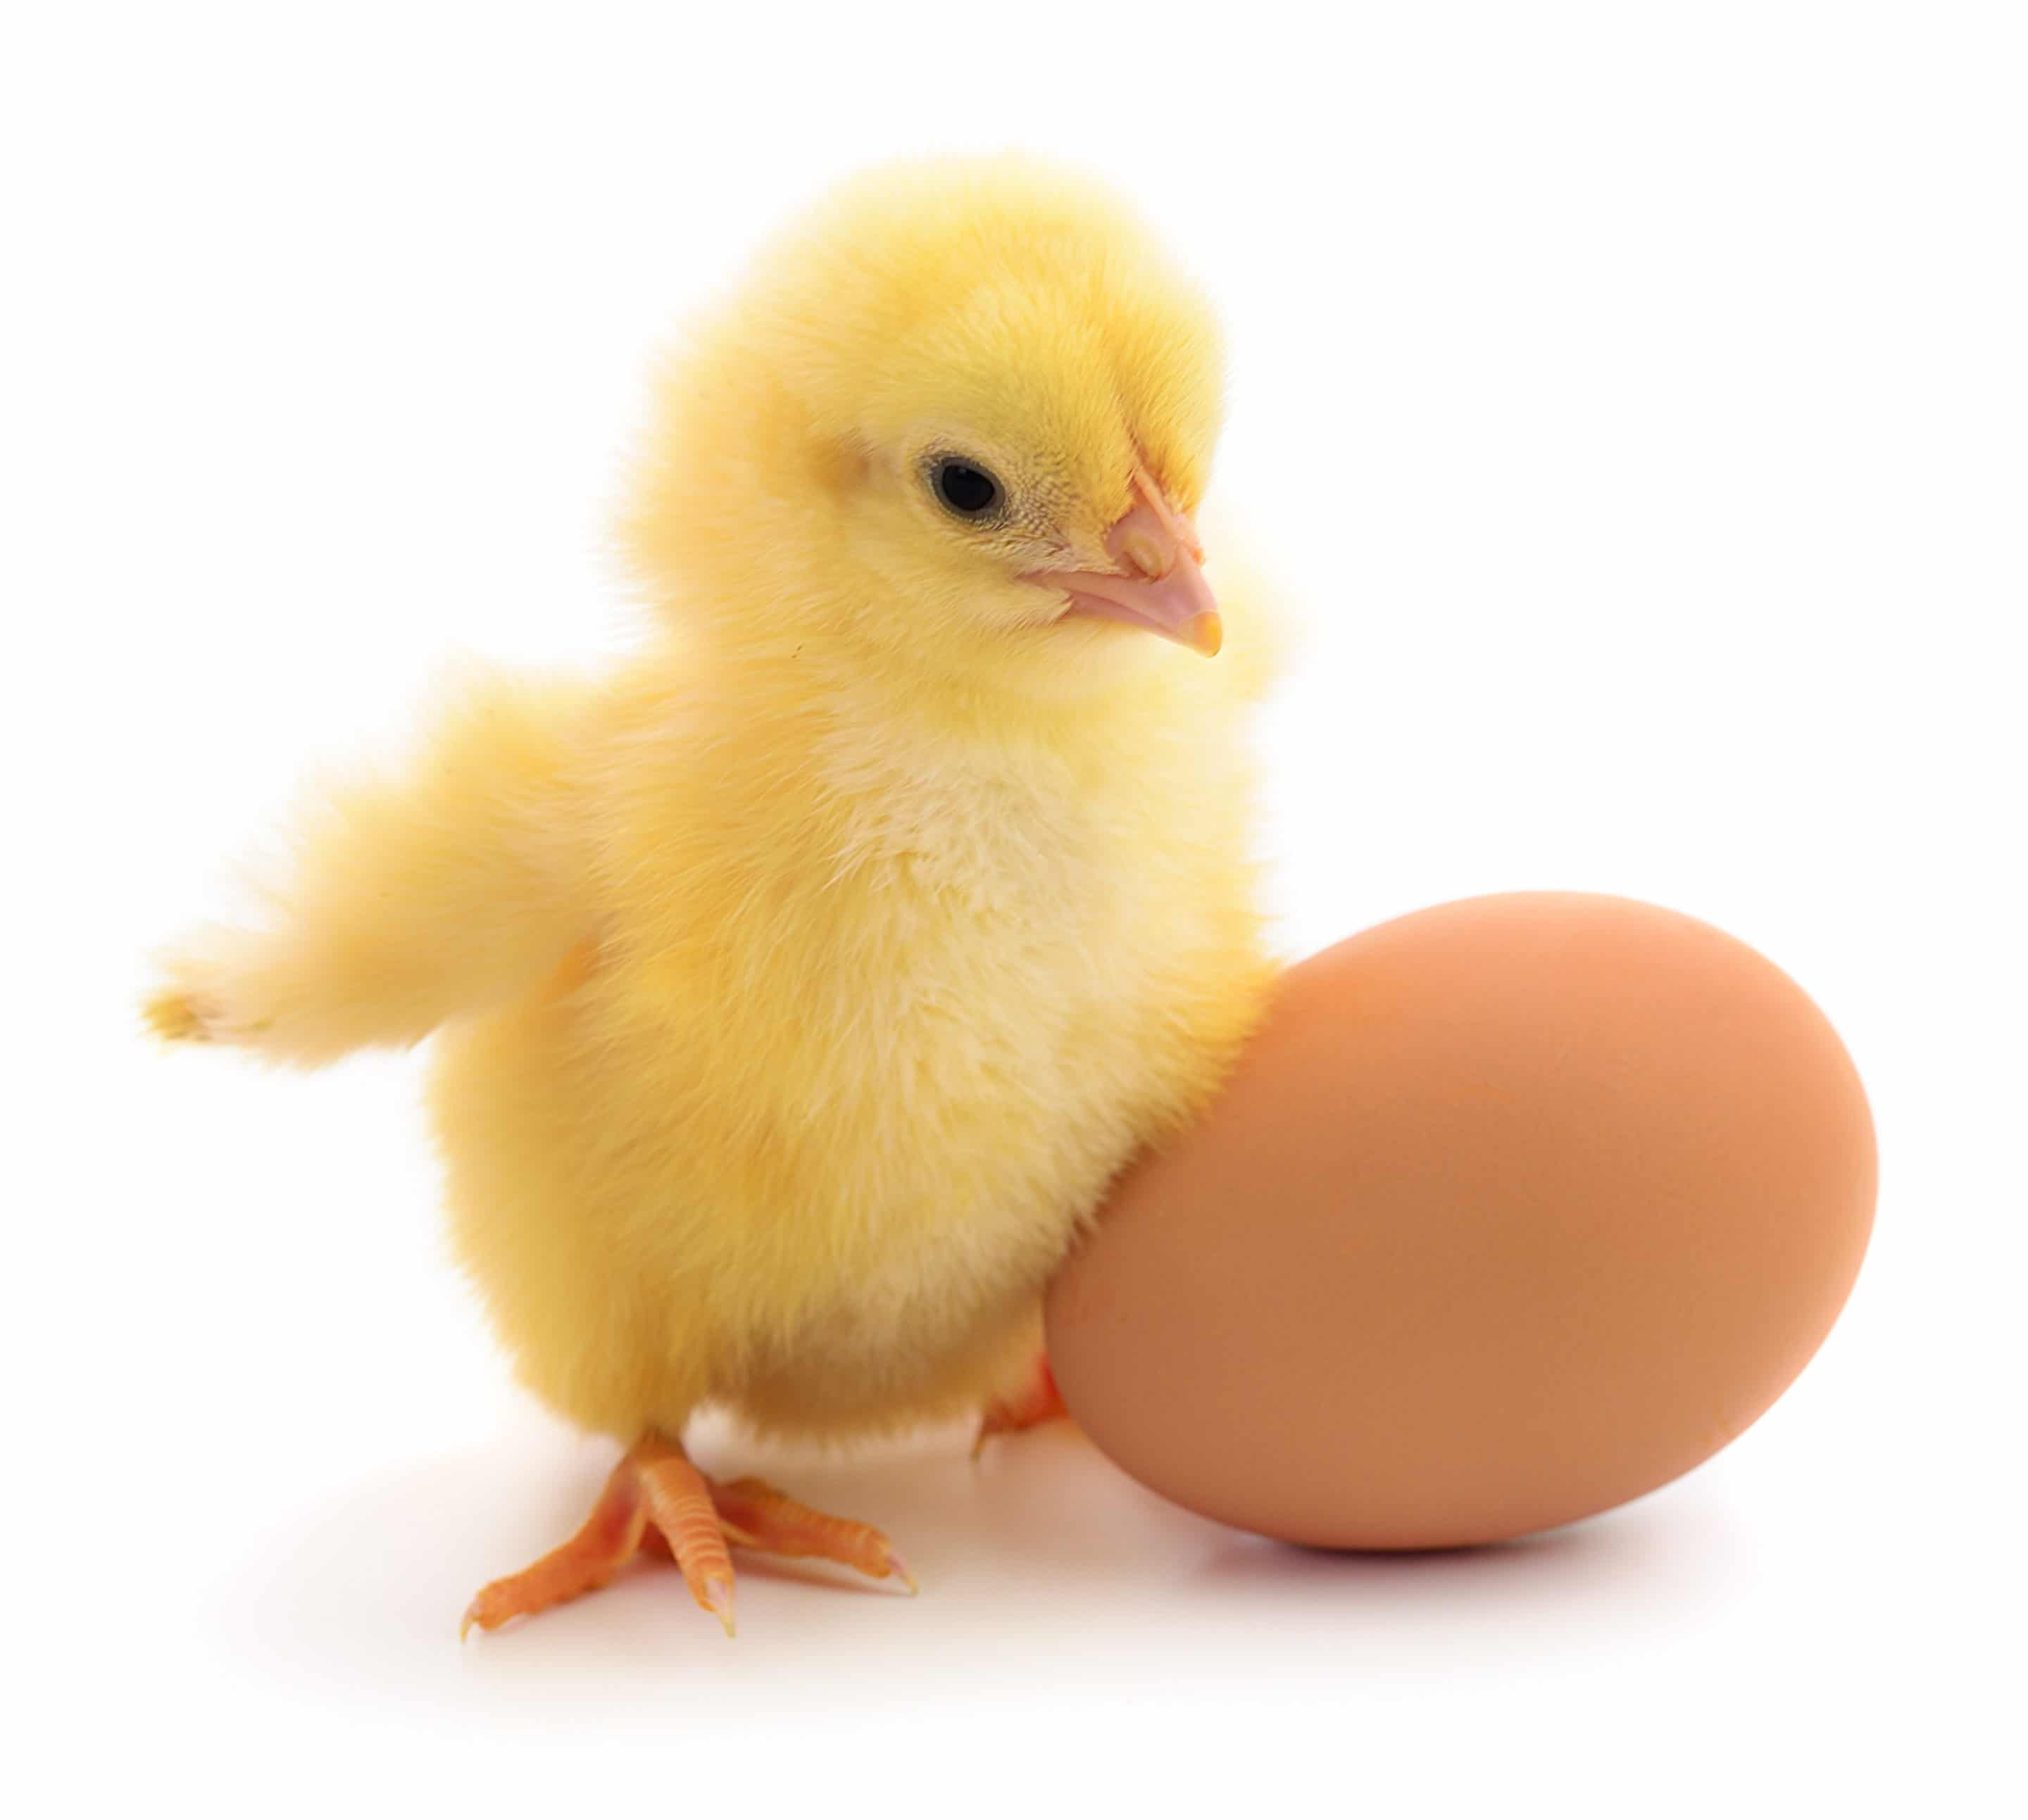 Ordering Hatching Eggs What To Expect Ecofarming Daily